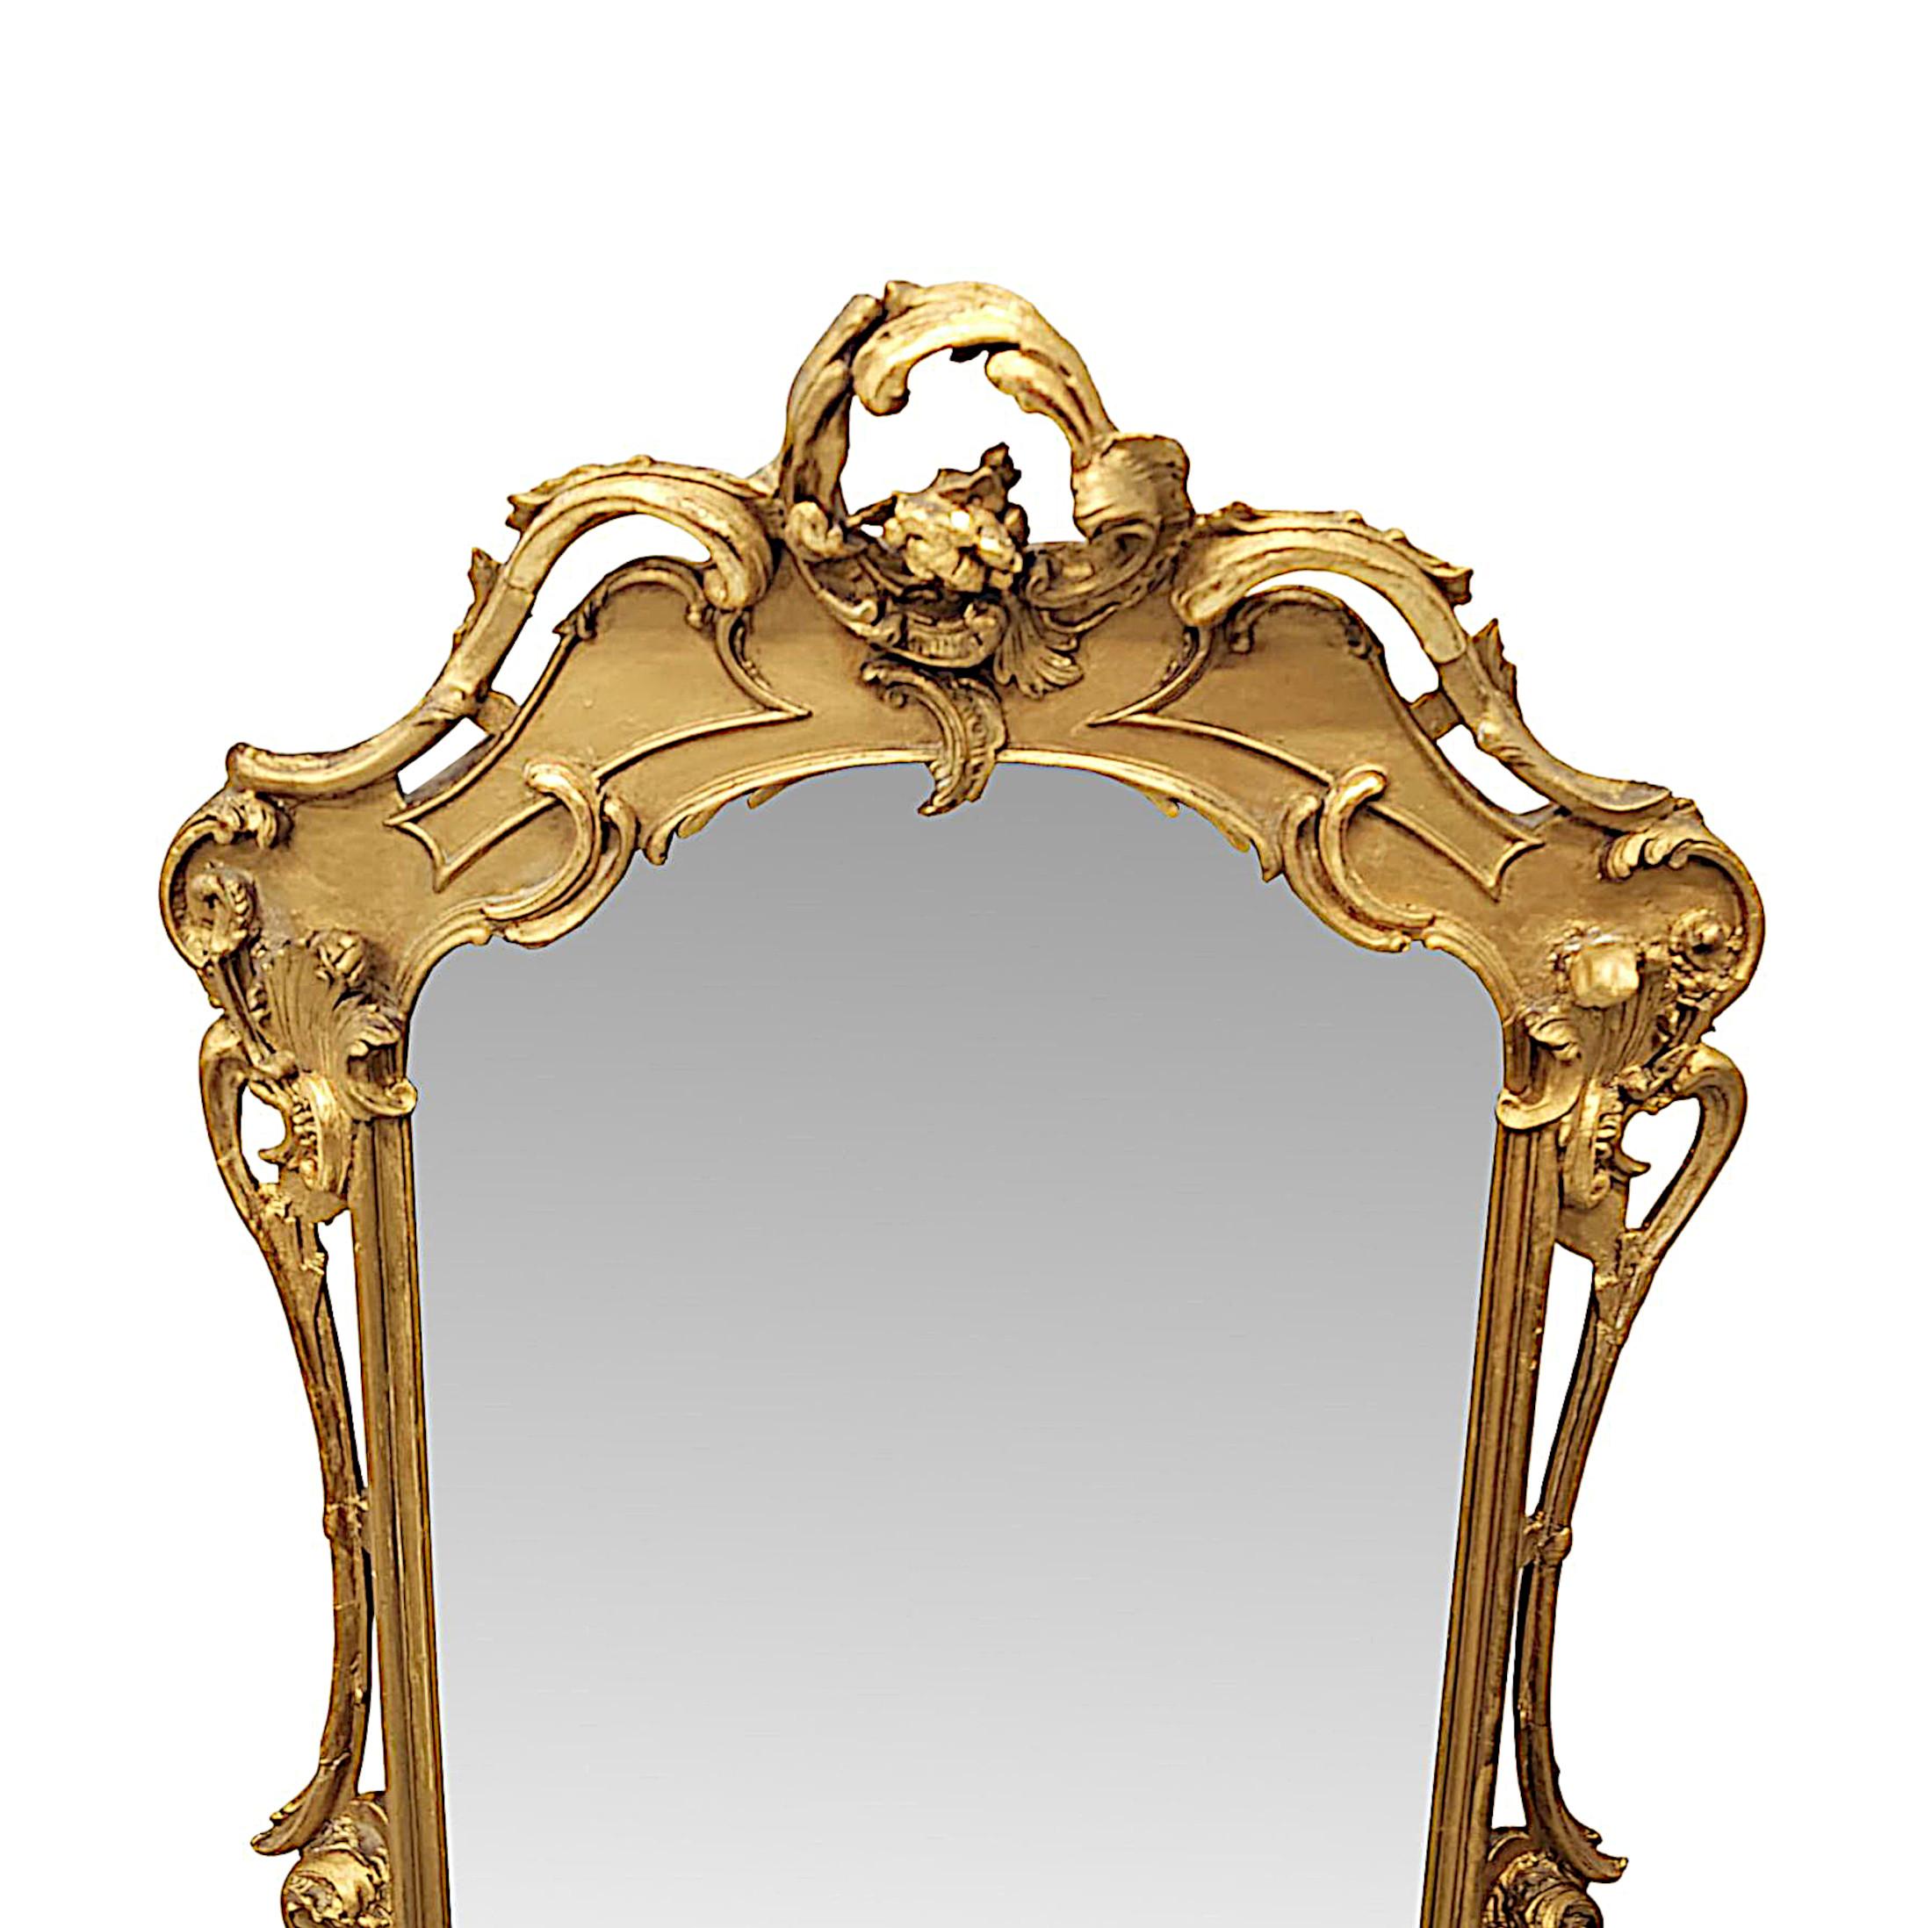 A rare 19th Century giltwood pier, hall or dressing mirror, finely hand carved and of exceptional quality.  The original, shaped mirror glass plate is set within a stunning pierced, moulded and fluted giltwood frame which is profusely and